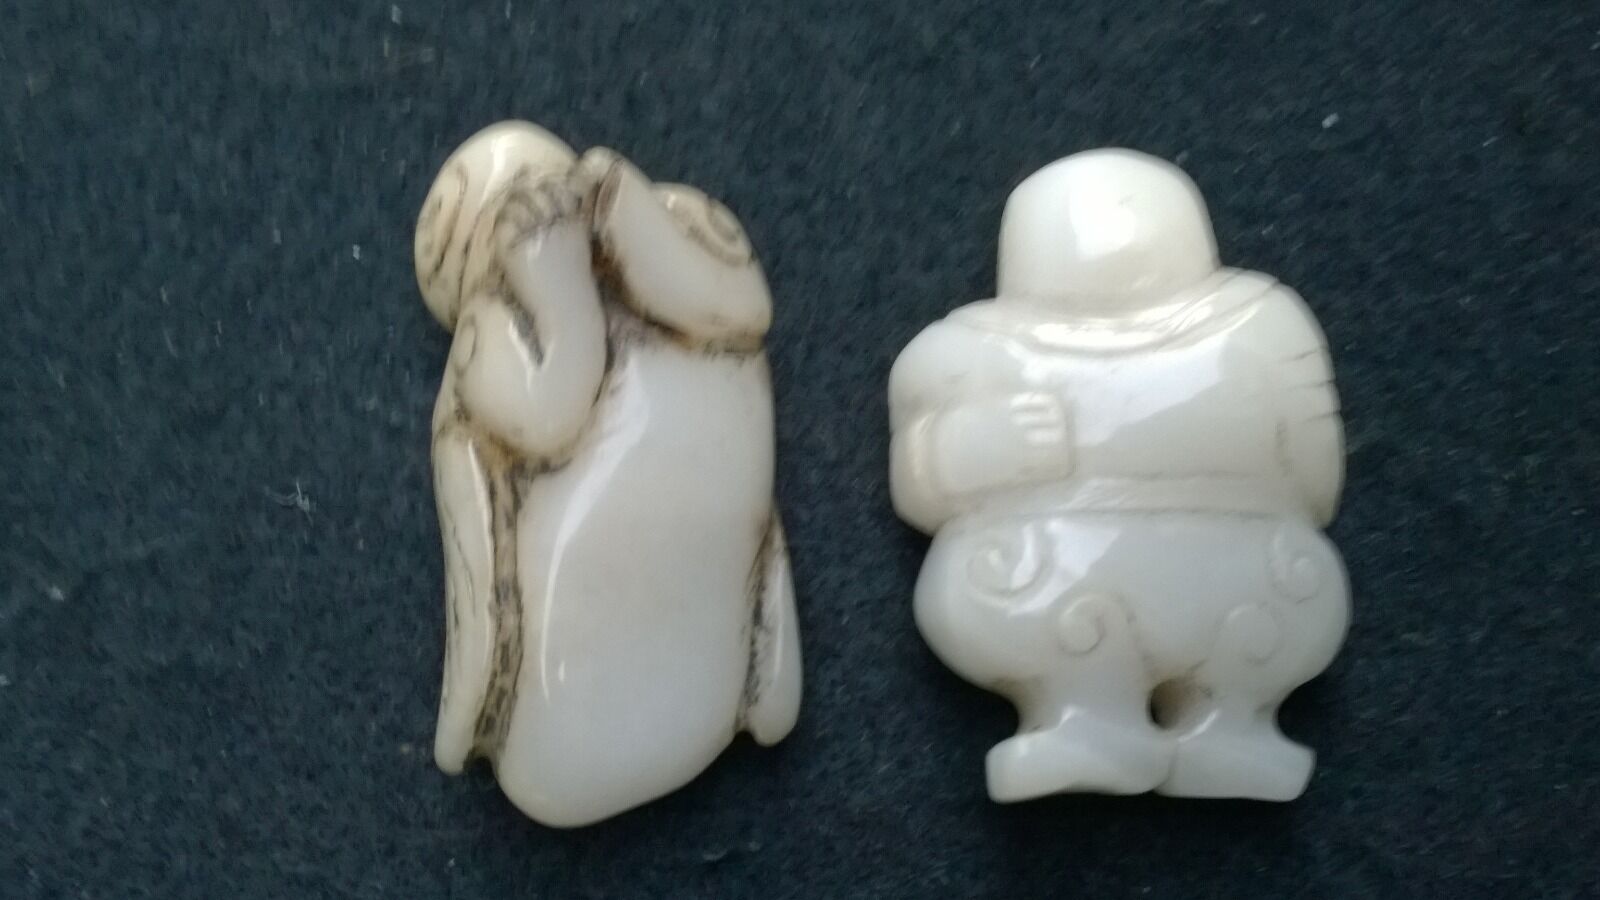 Group of Two Hardstone Quality Serpentine Amulets Bird-Man and Minister. Без бренда - фотография #3